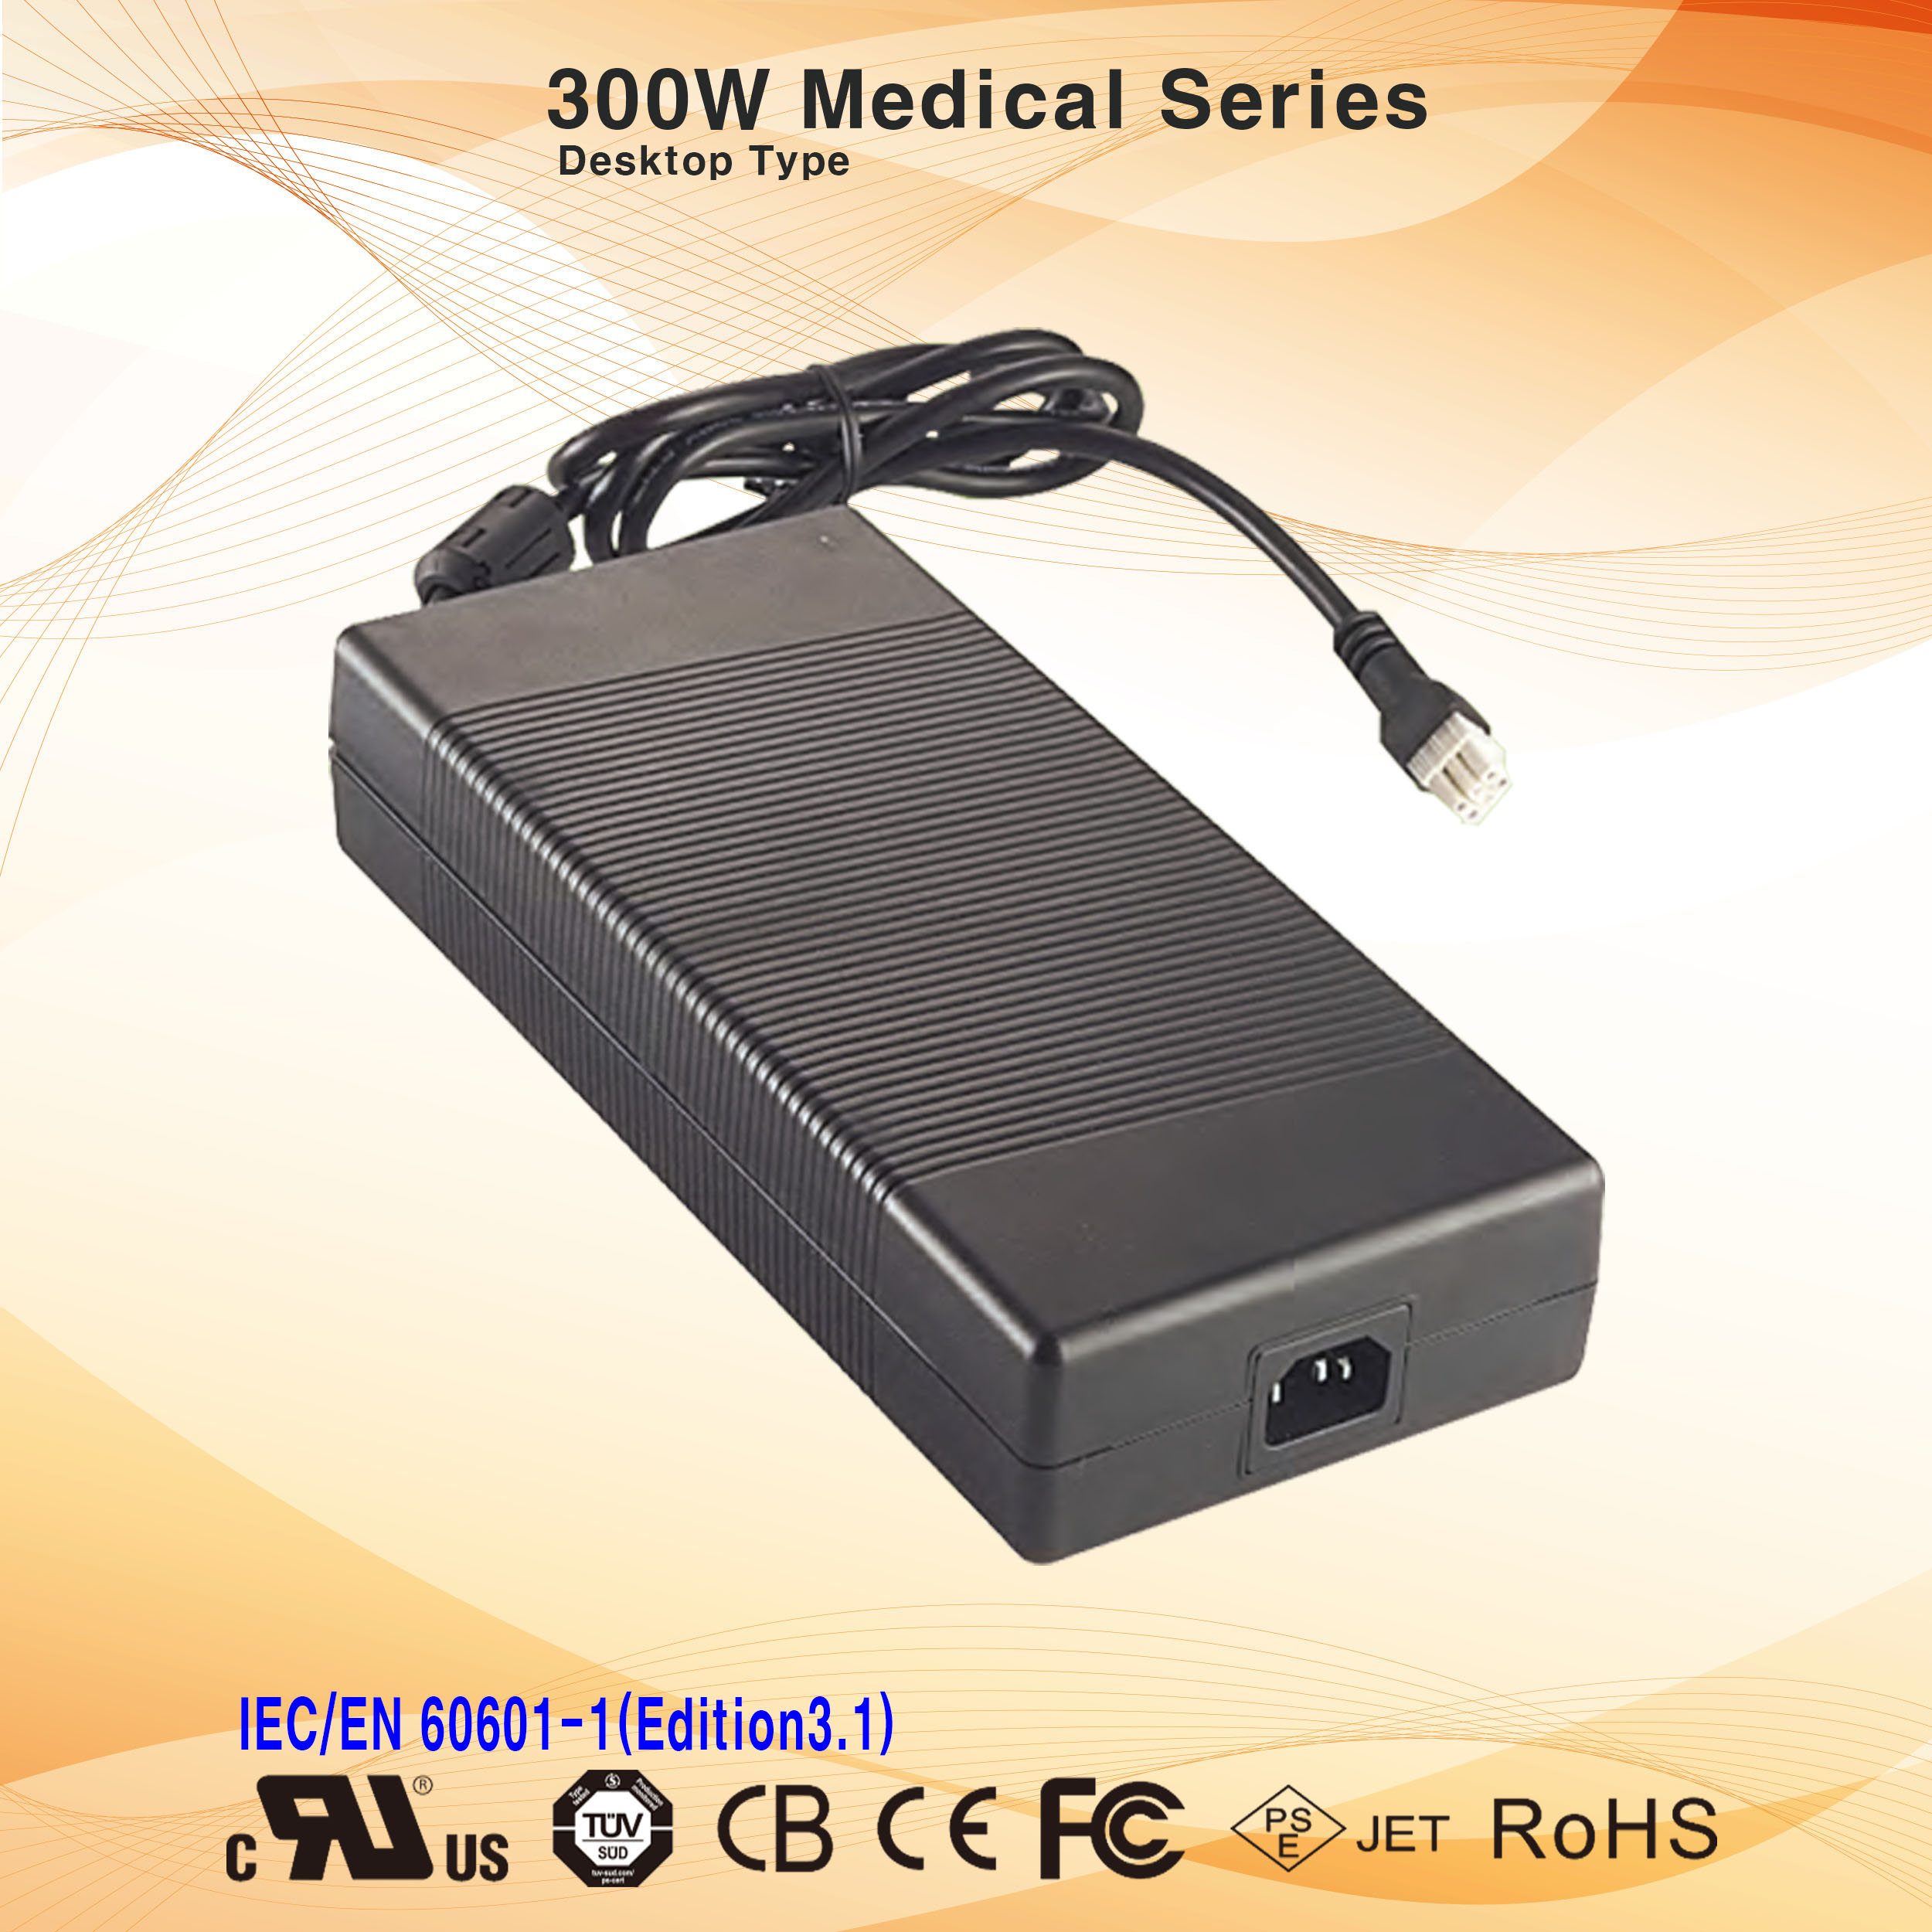 300W Medical Adapter Series (ADT)